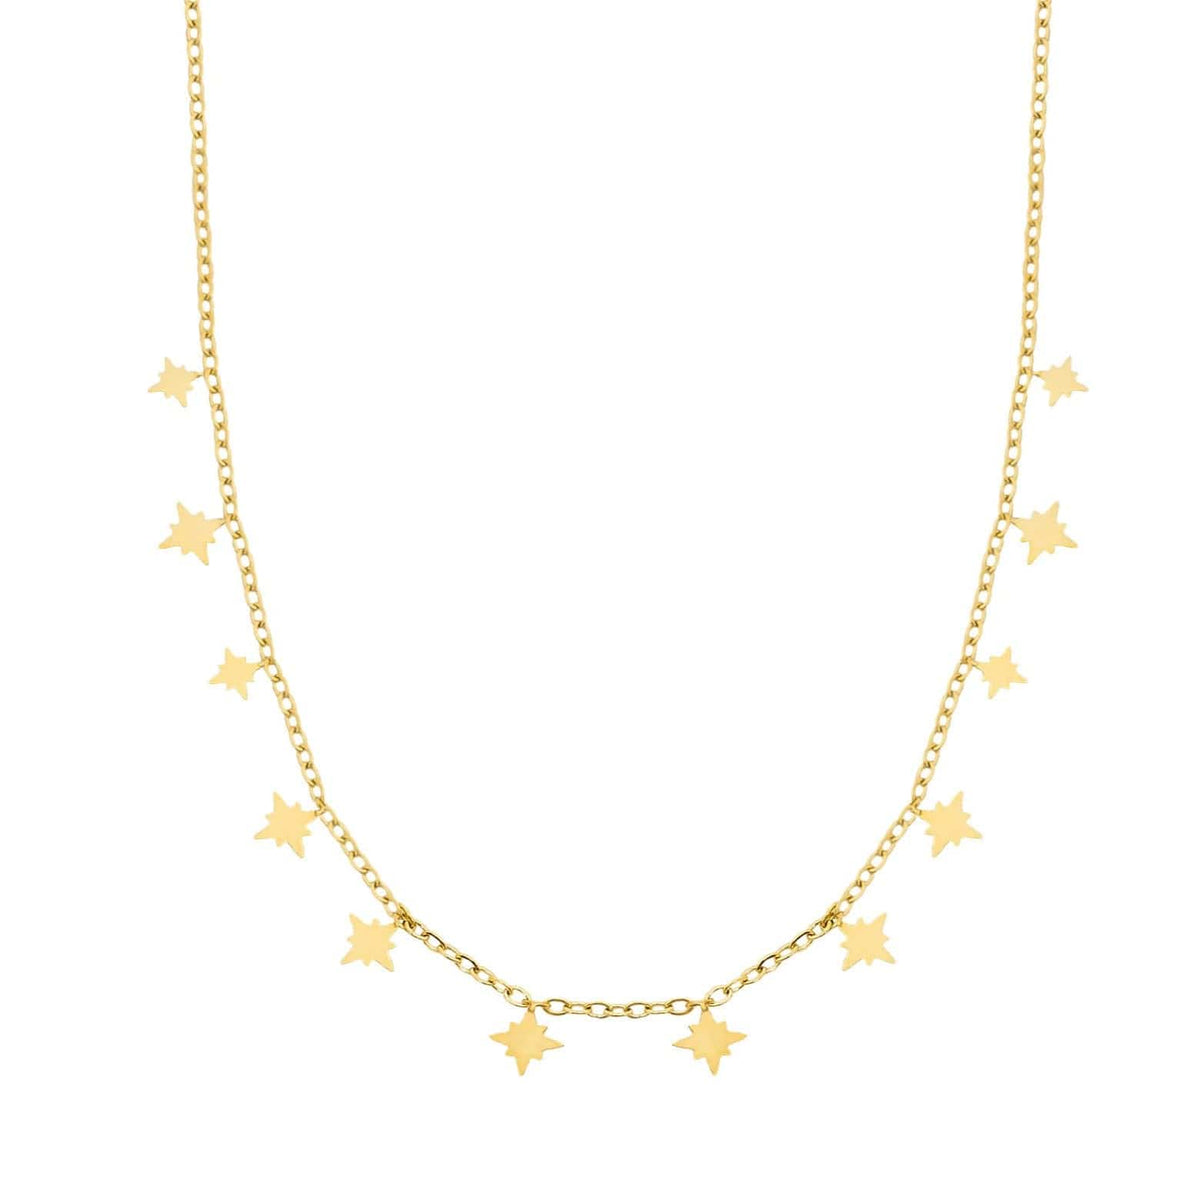 BohoMoon Stainless Steel Northern Star Necklace Gold